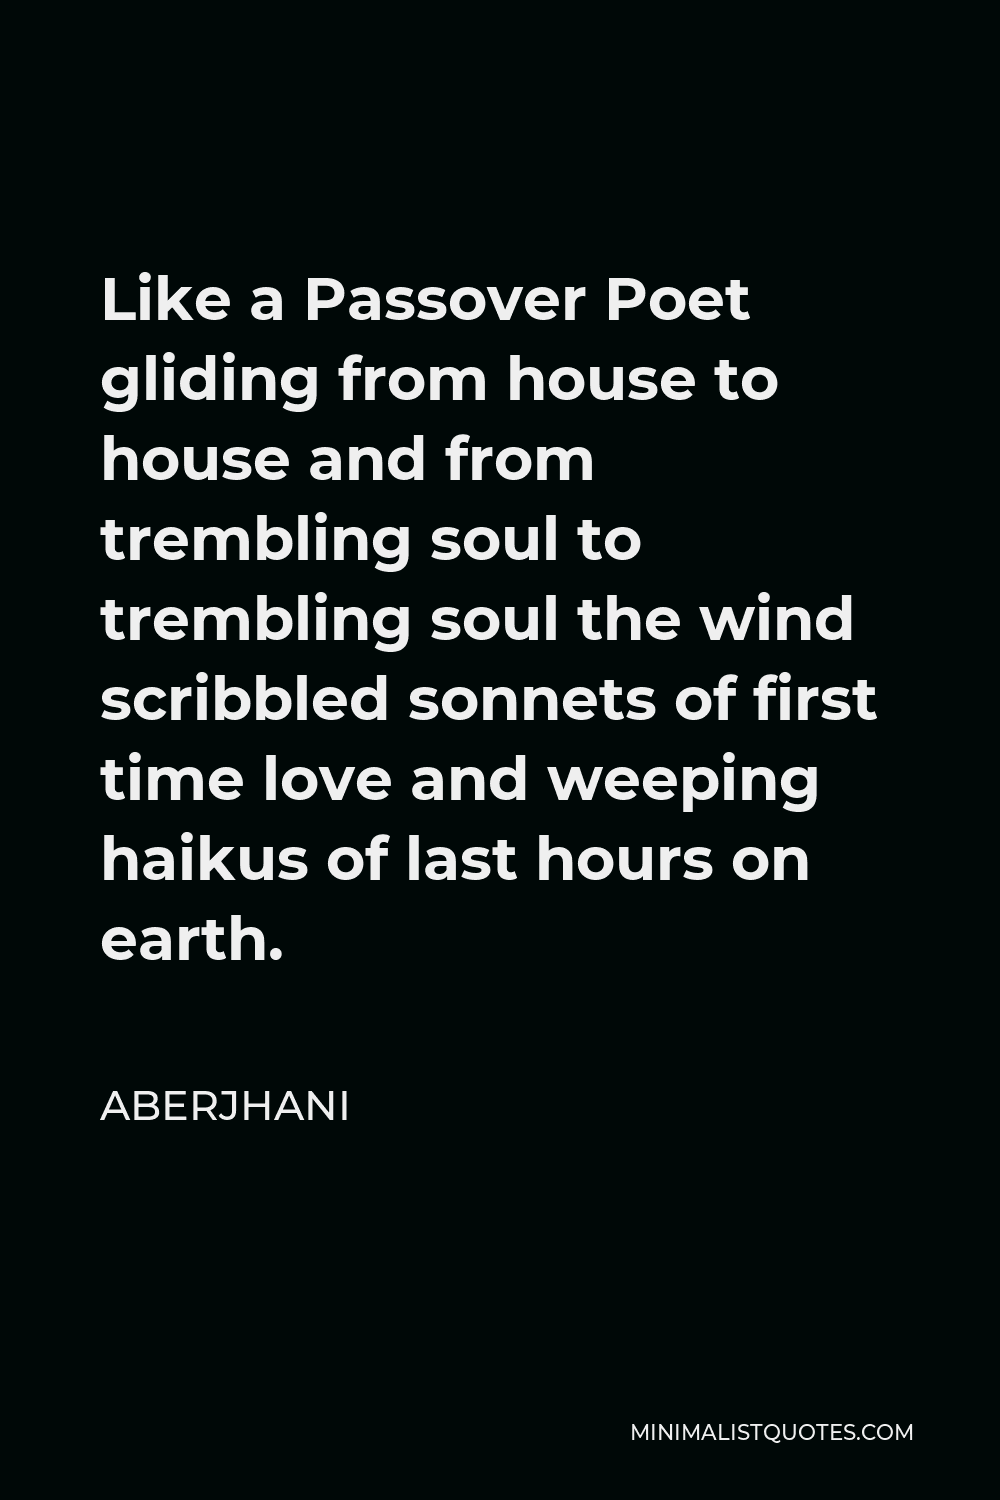 Aberjhani Quote - Like a Passover Poet gliding from house to house and from trembling soul to trembling soul the wind scribbled sonnets of first time love and weeping haikus of last hours on earth.